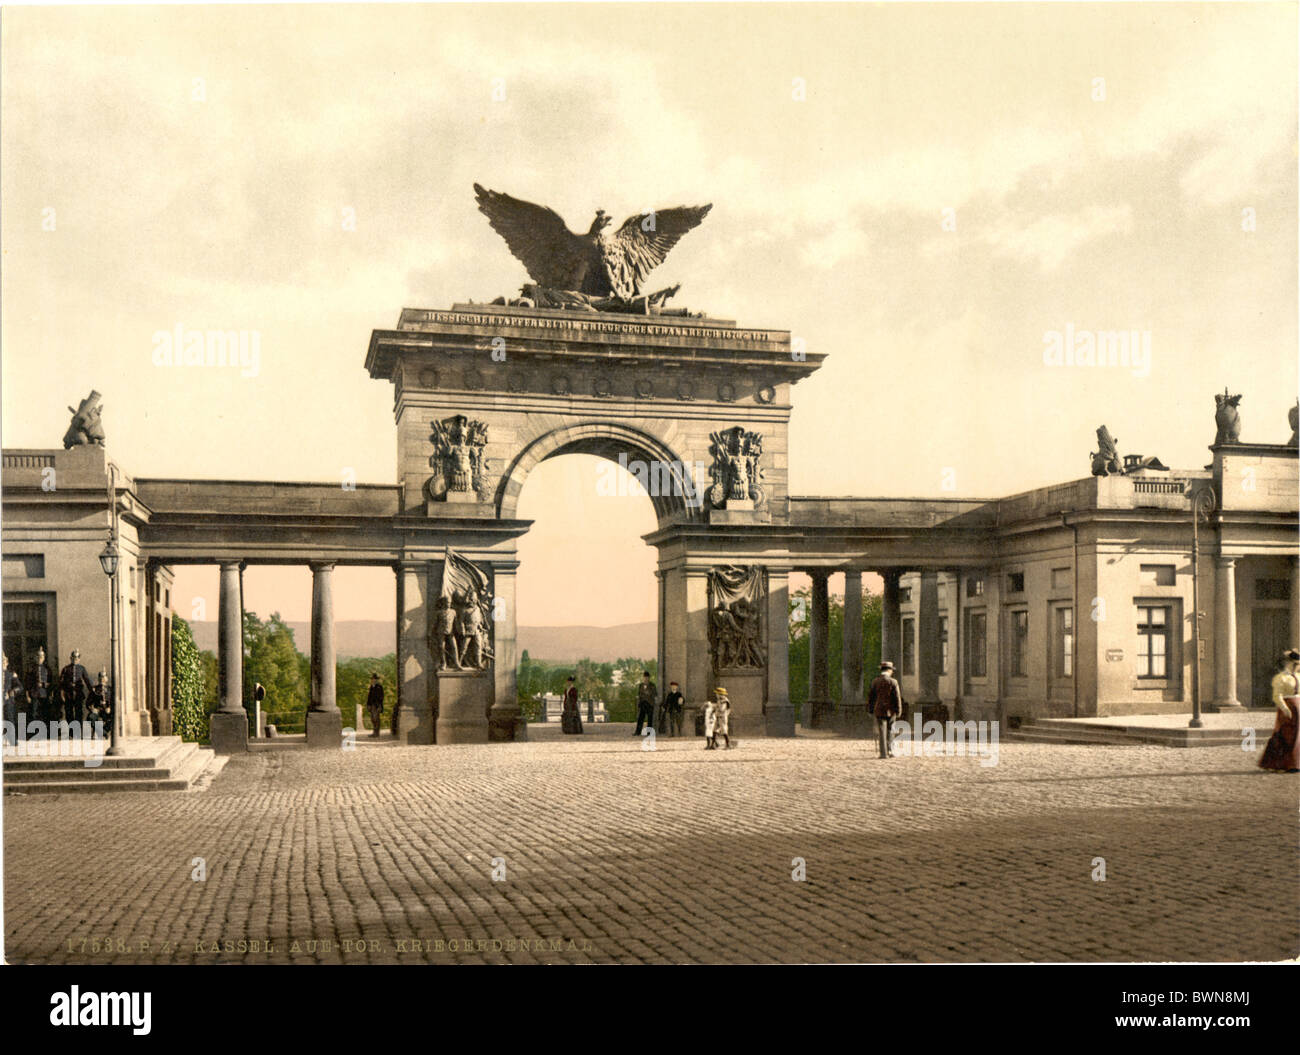 Krieger Monument Thor Cassel Kassel Hesse-Nassau Germany Europe German Empire Aue-Tor Photochrom about 1900 Stock Photo